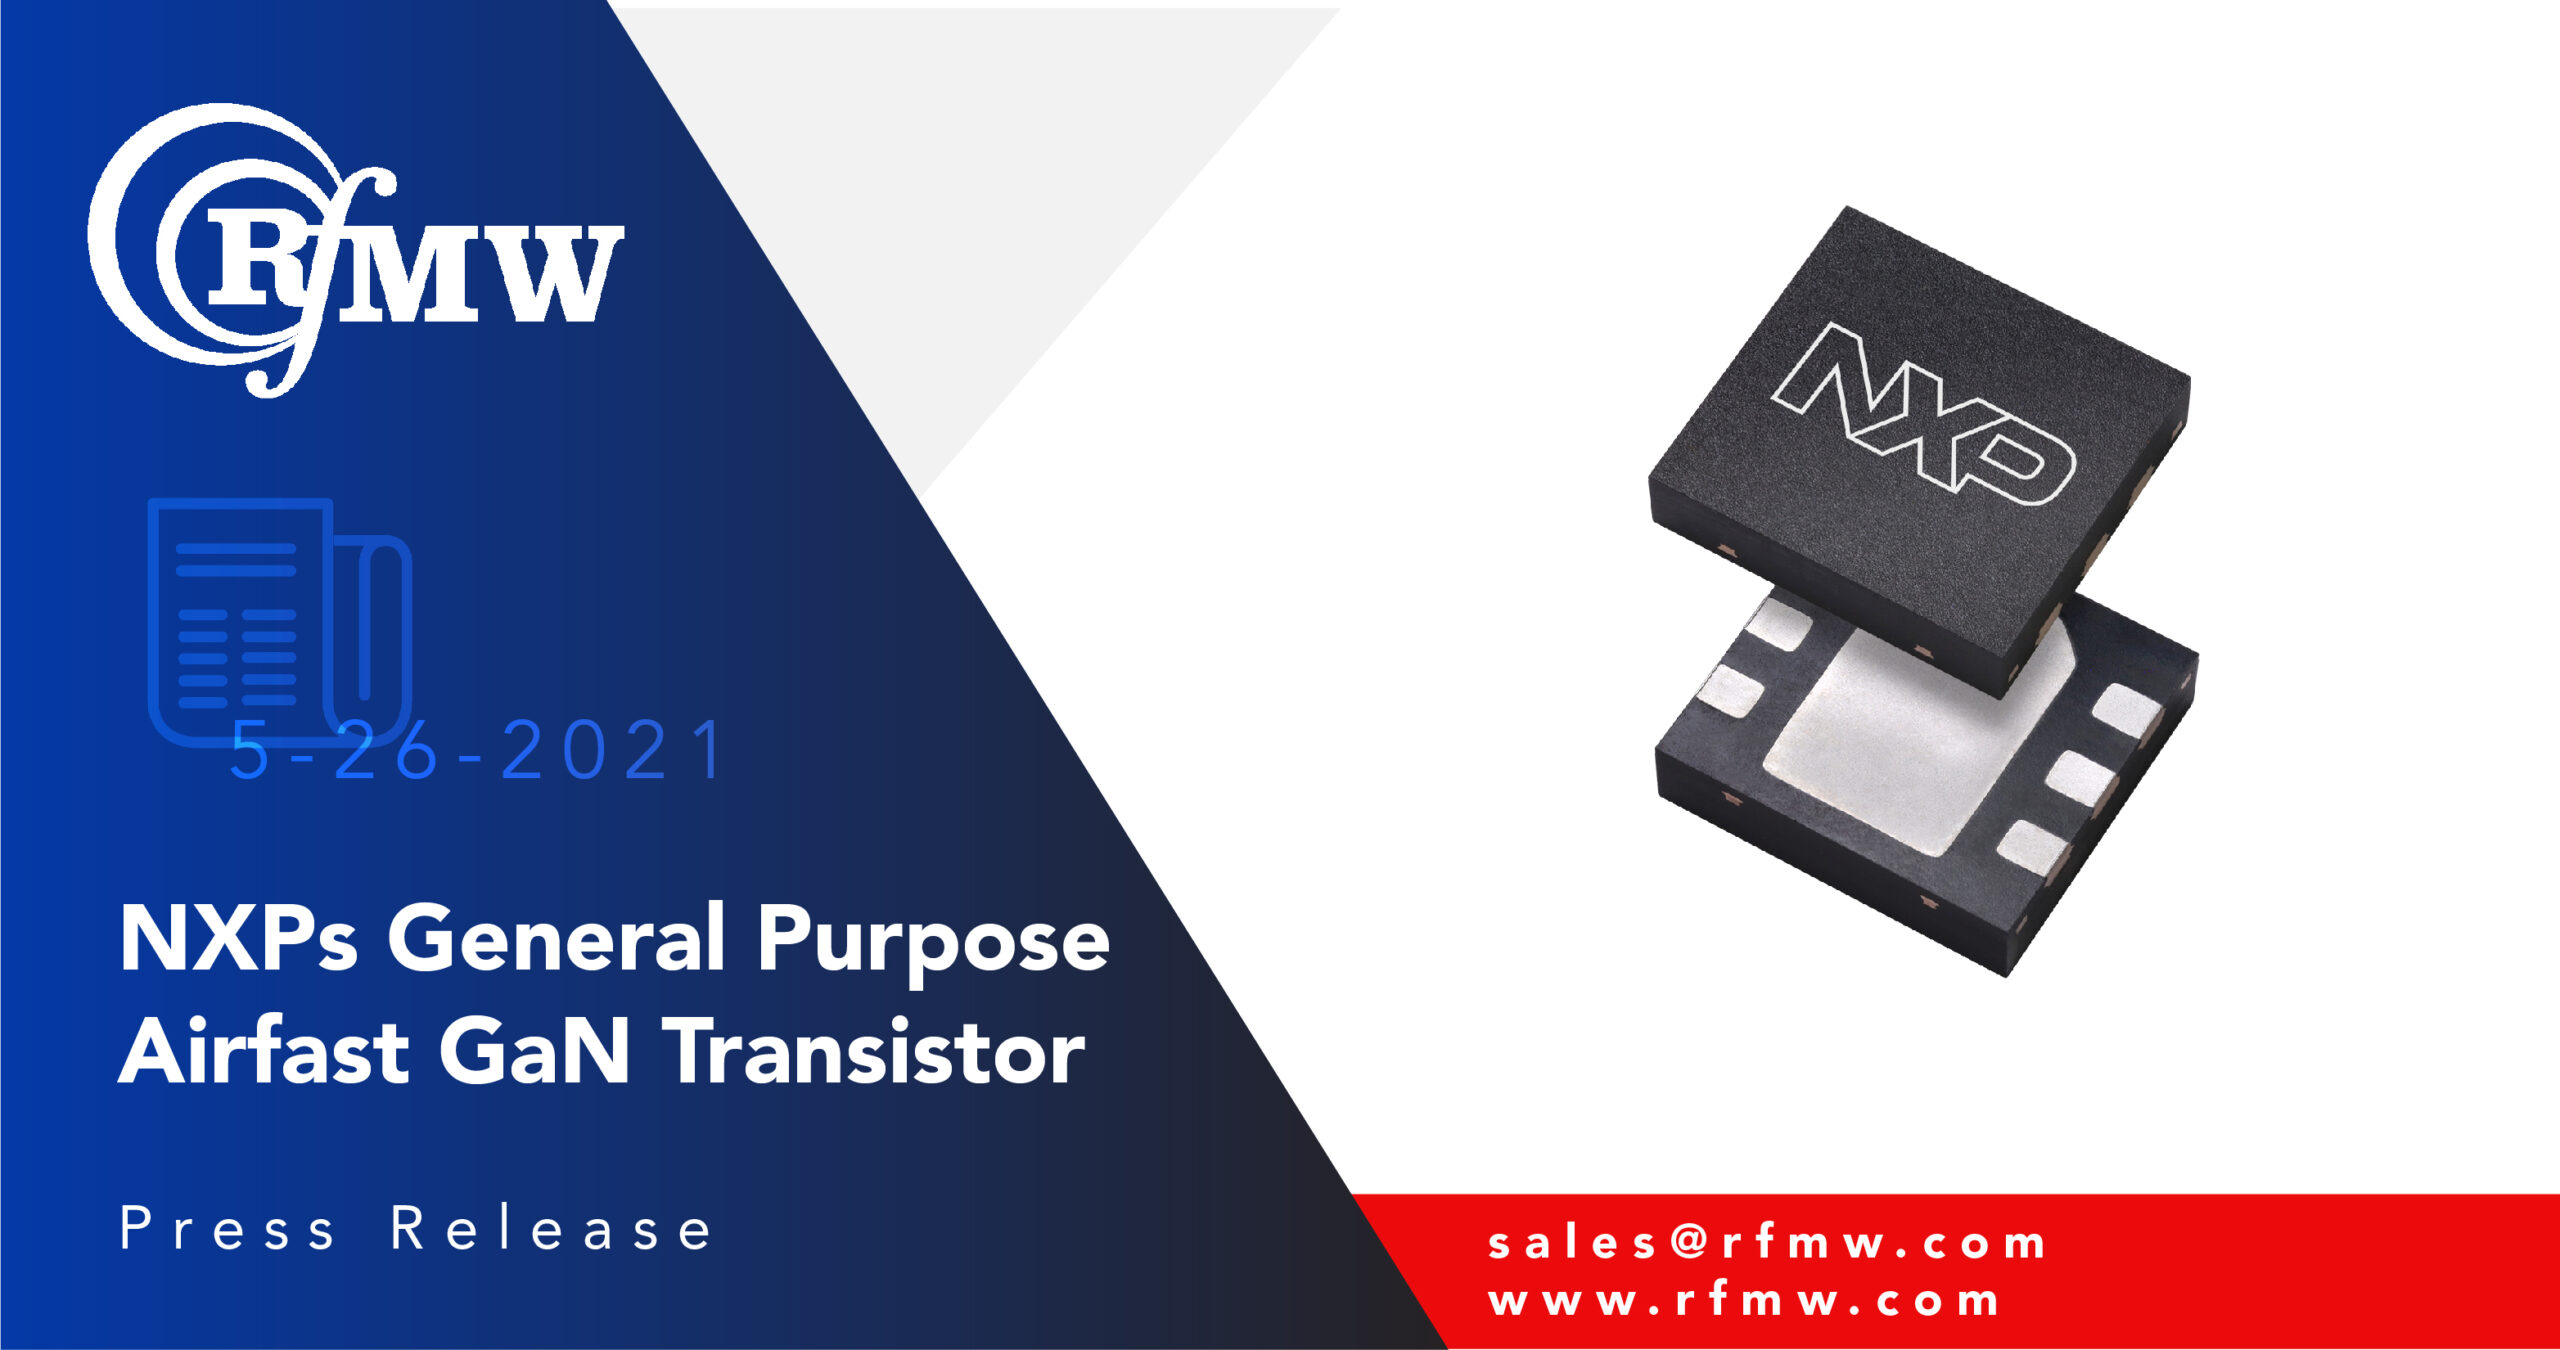 NXP’s A3G26D055NT4 GaN on SiC discrete RF transistor delivers 55 Watts of peak power from 100 to 2690 MHz